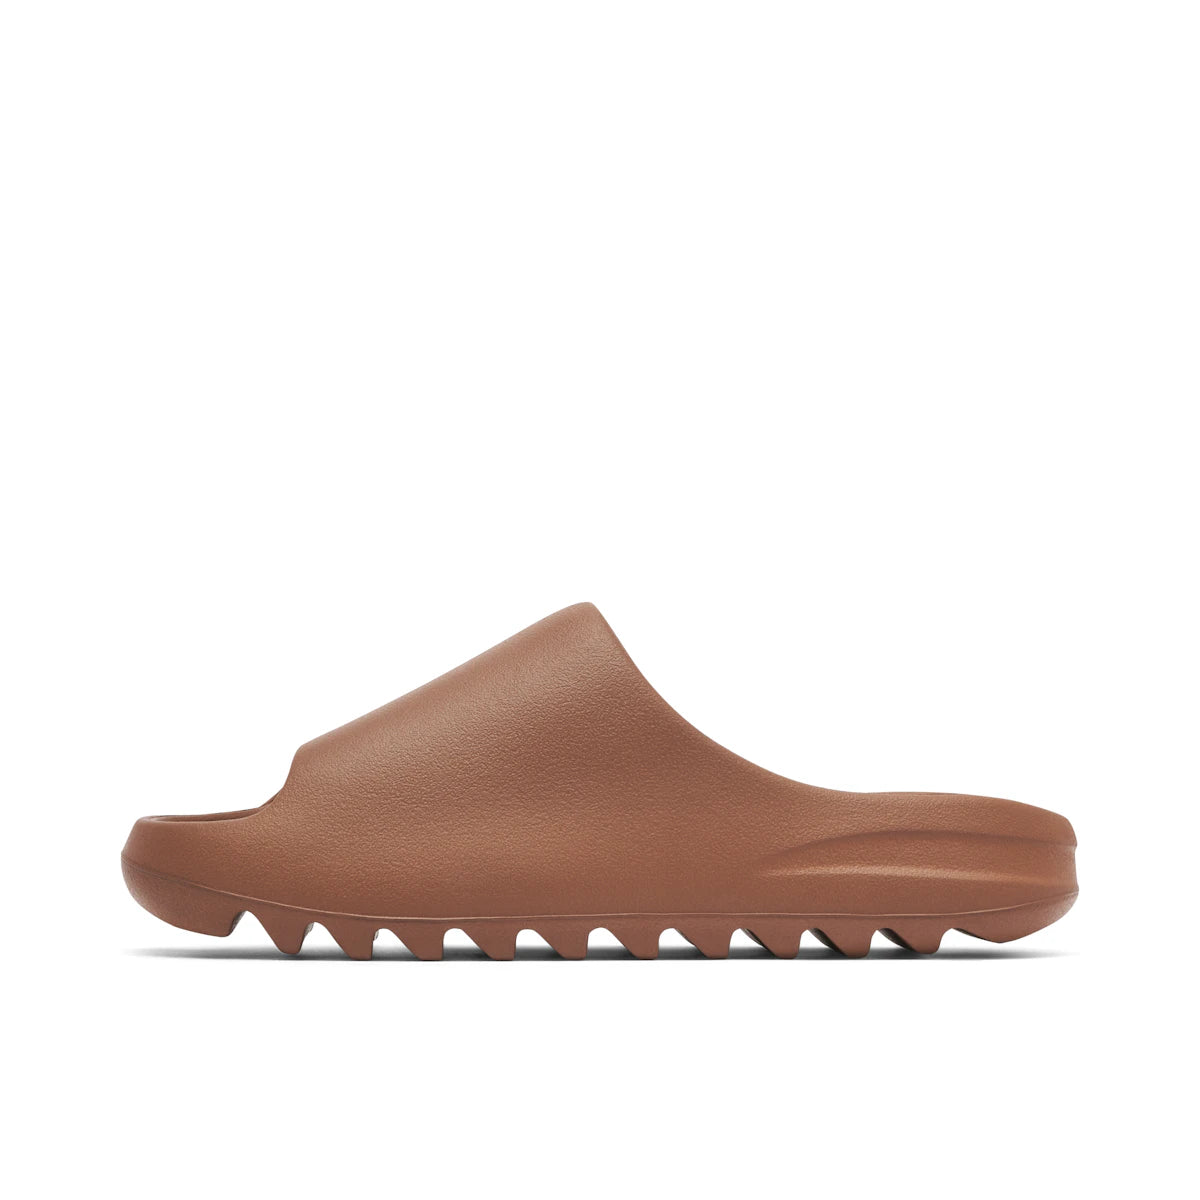 adidas Yeezy Slide Flax by Yeezy from £84.00